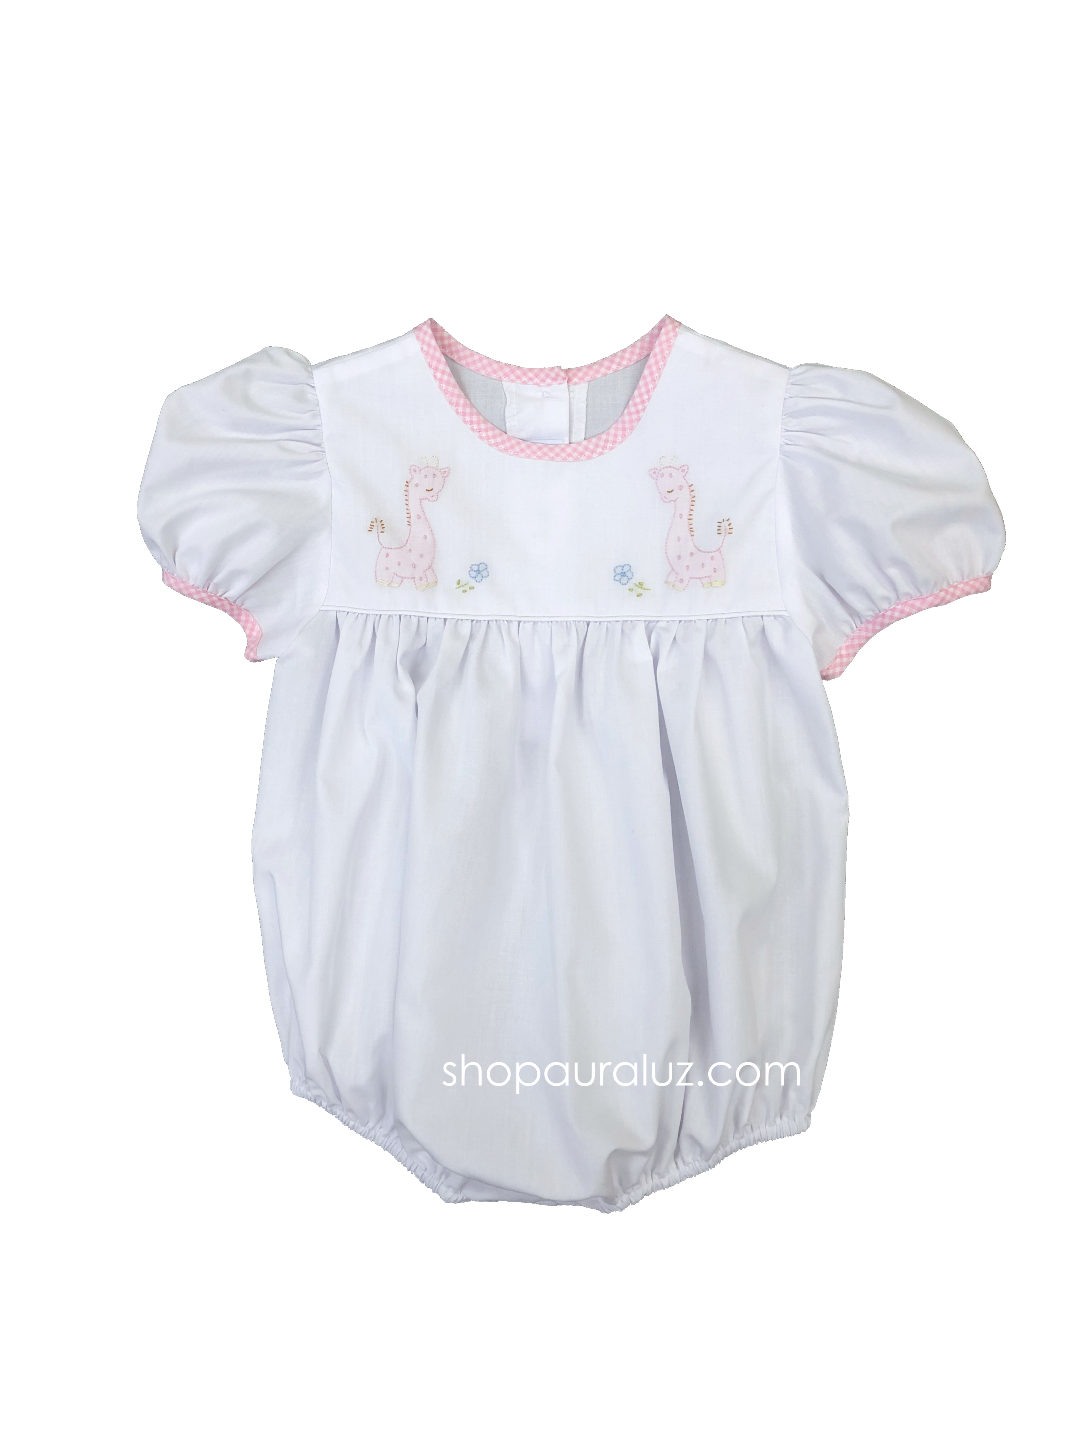 Auraluz Girl Bubble..White w/pink check trim, no collar and embroidered giraffes